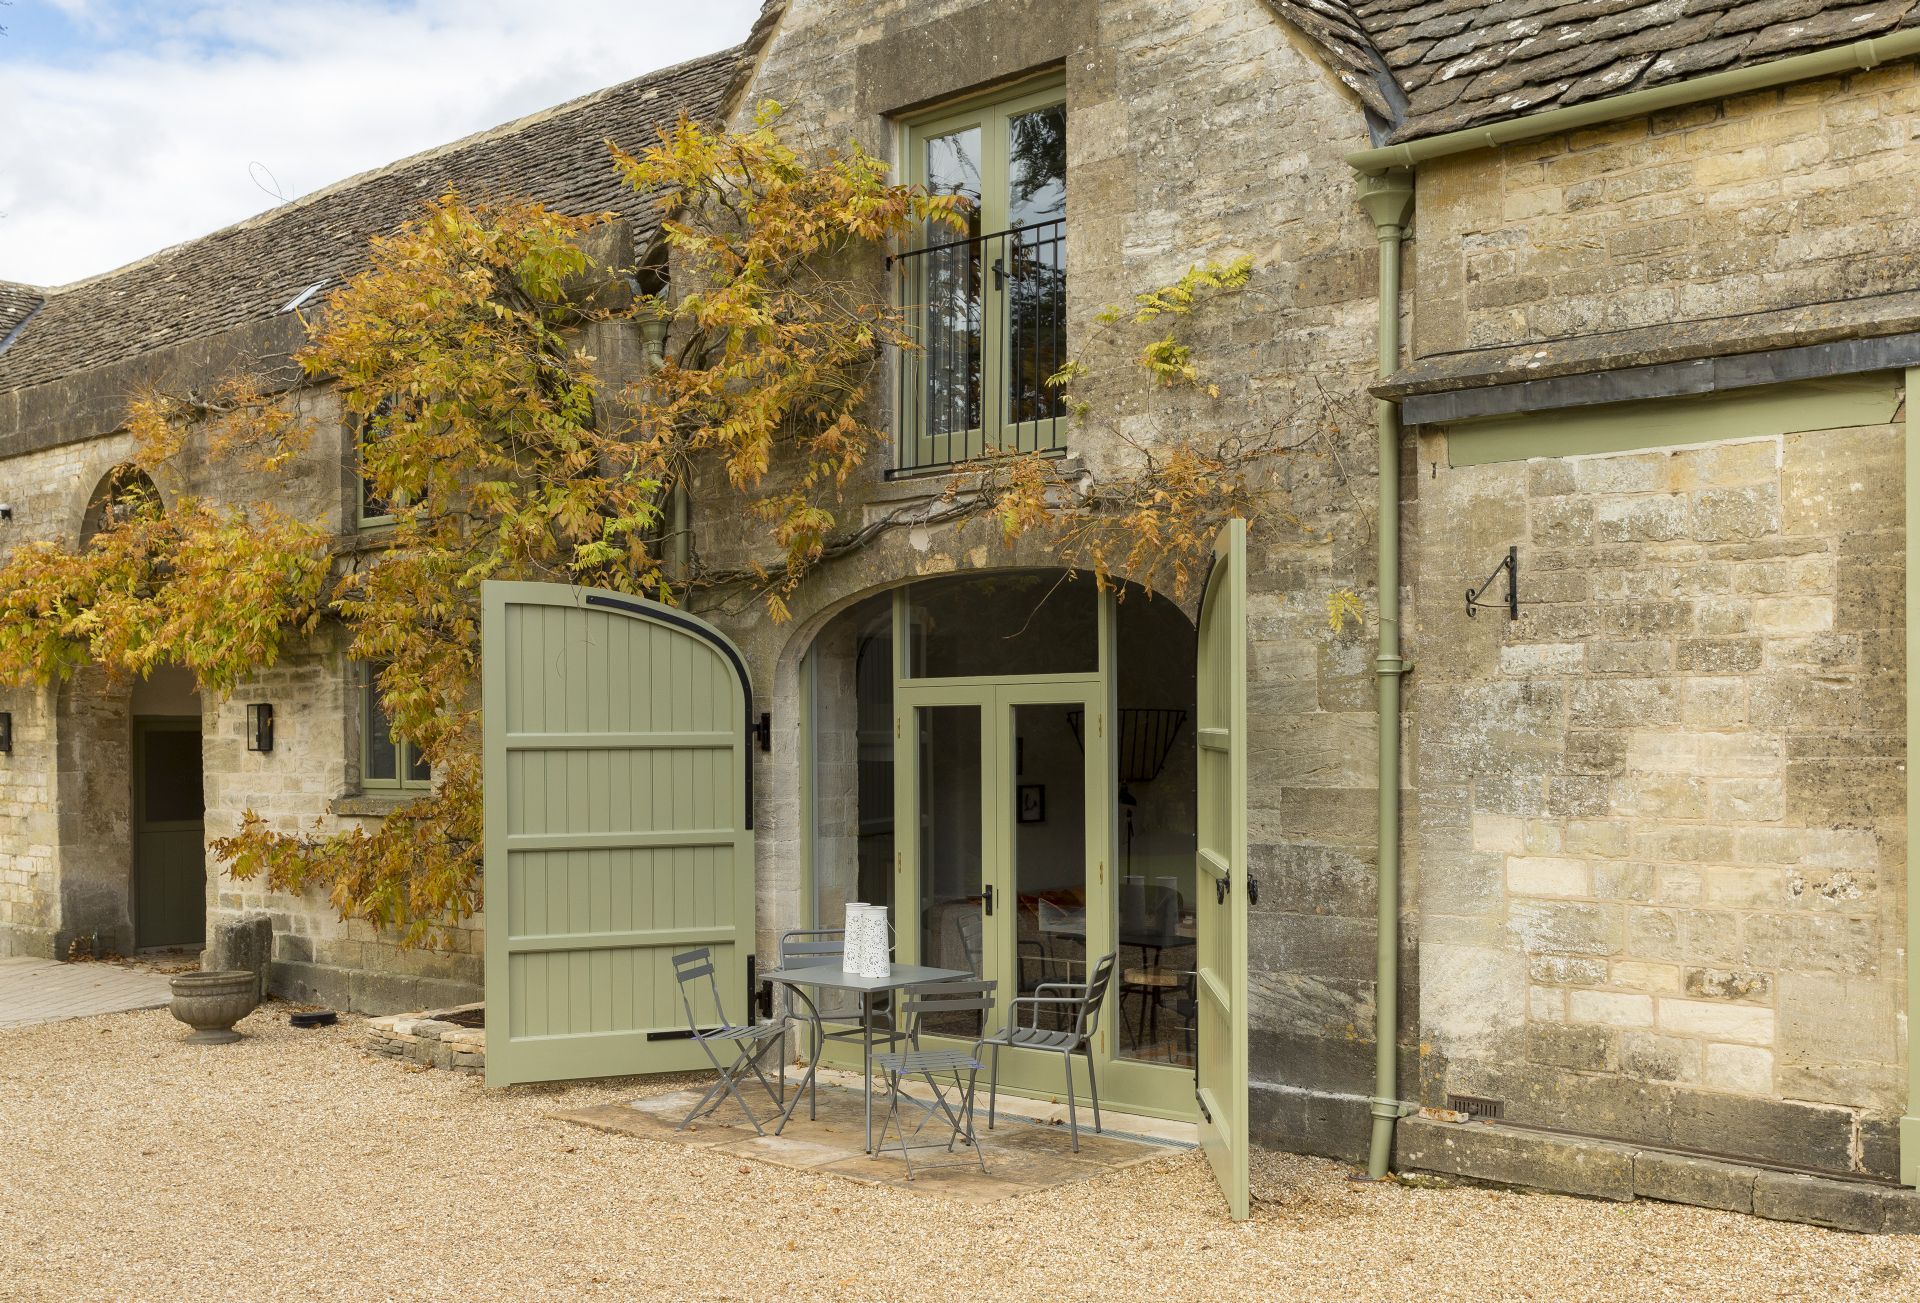 The Stables at The Lammas is located in Minchinhampton